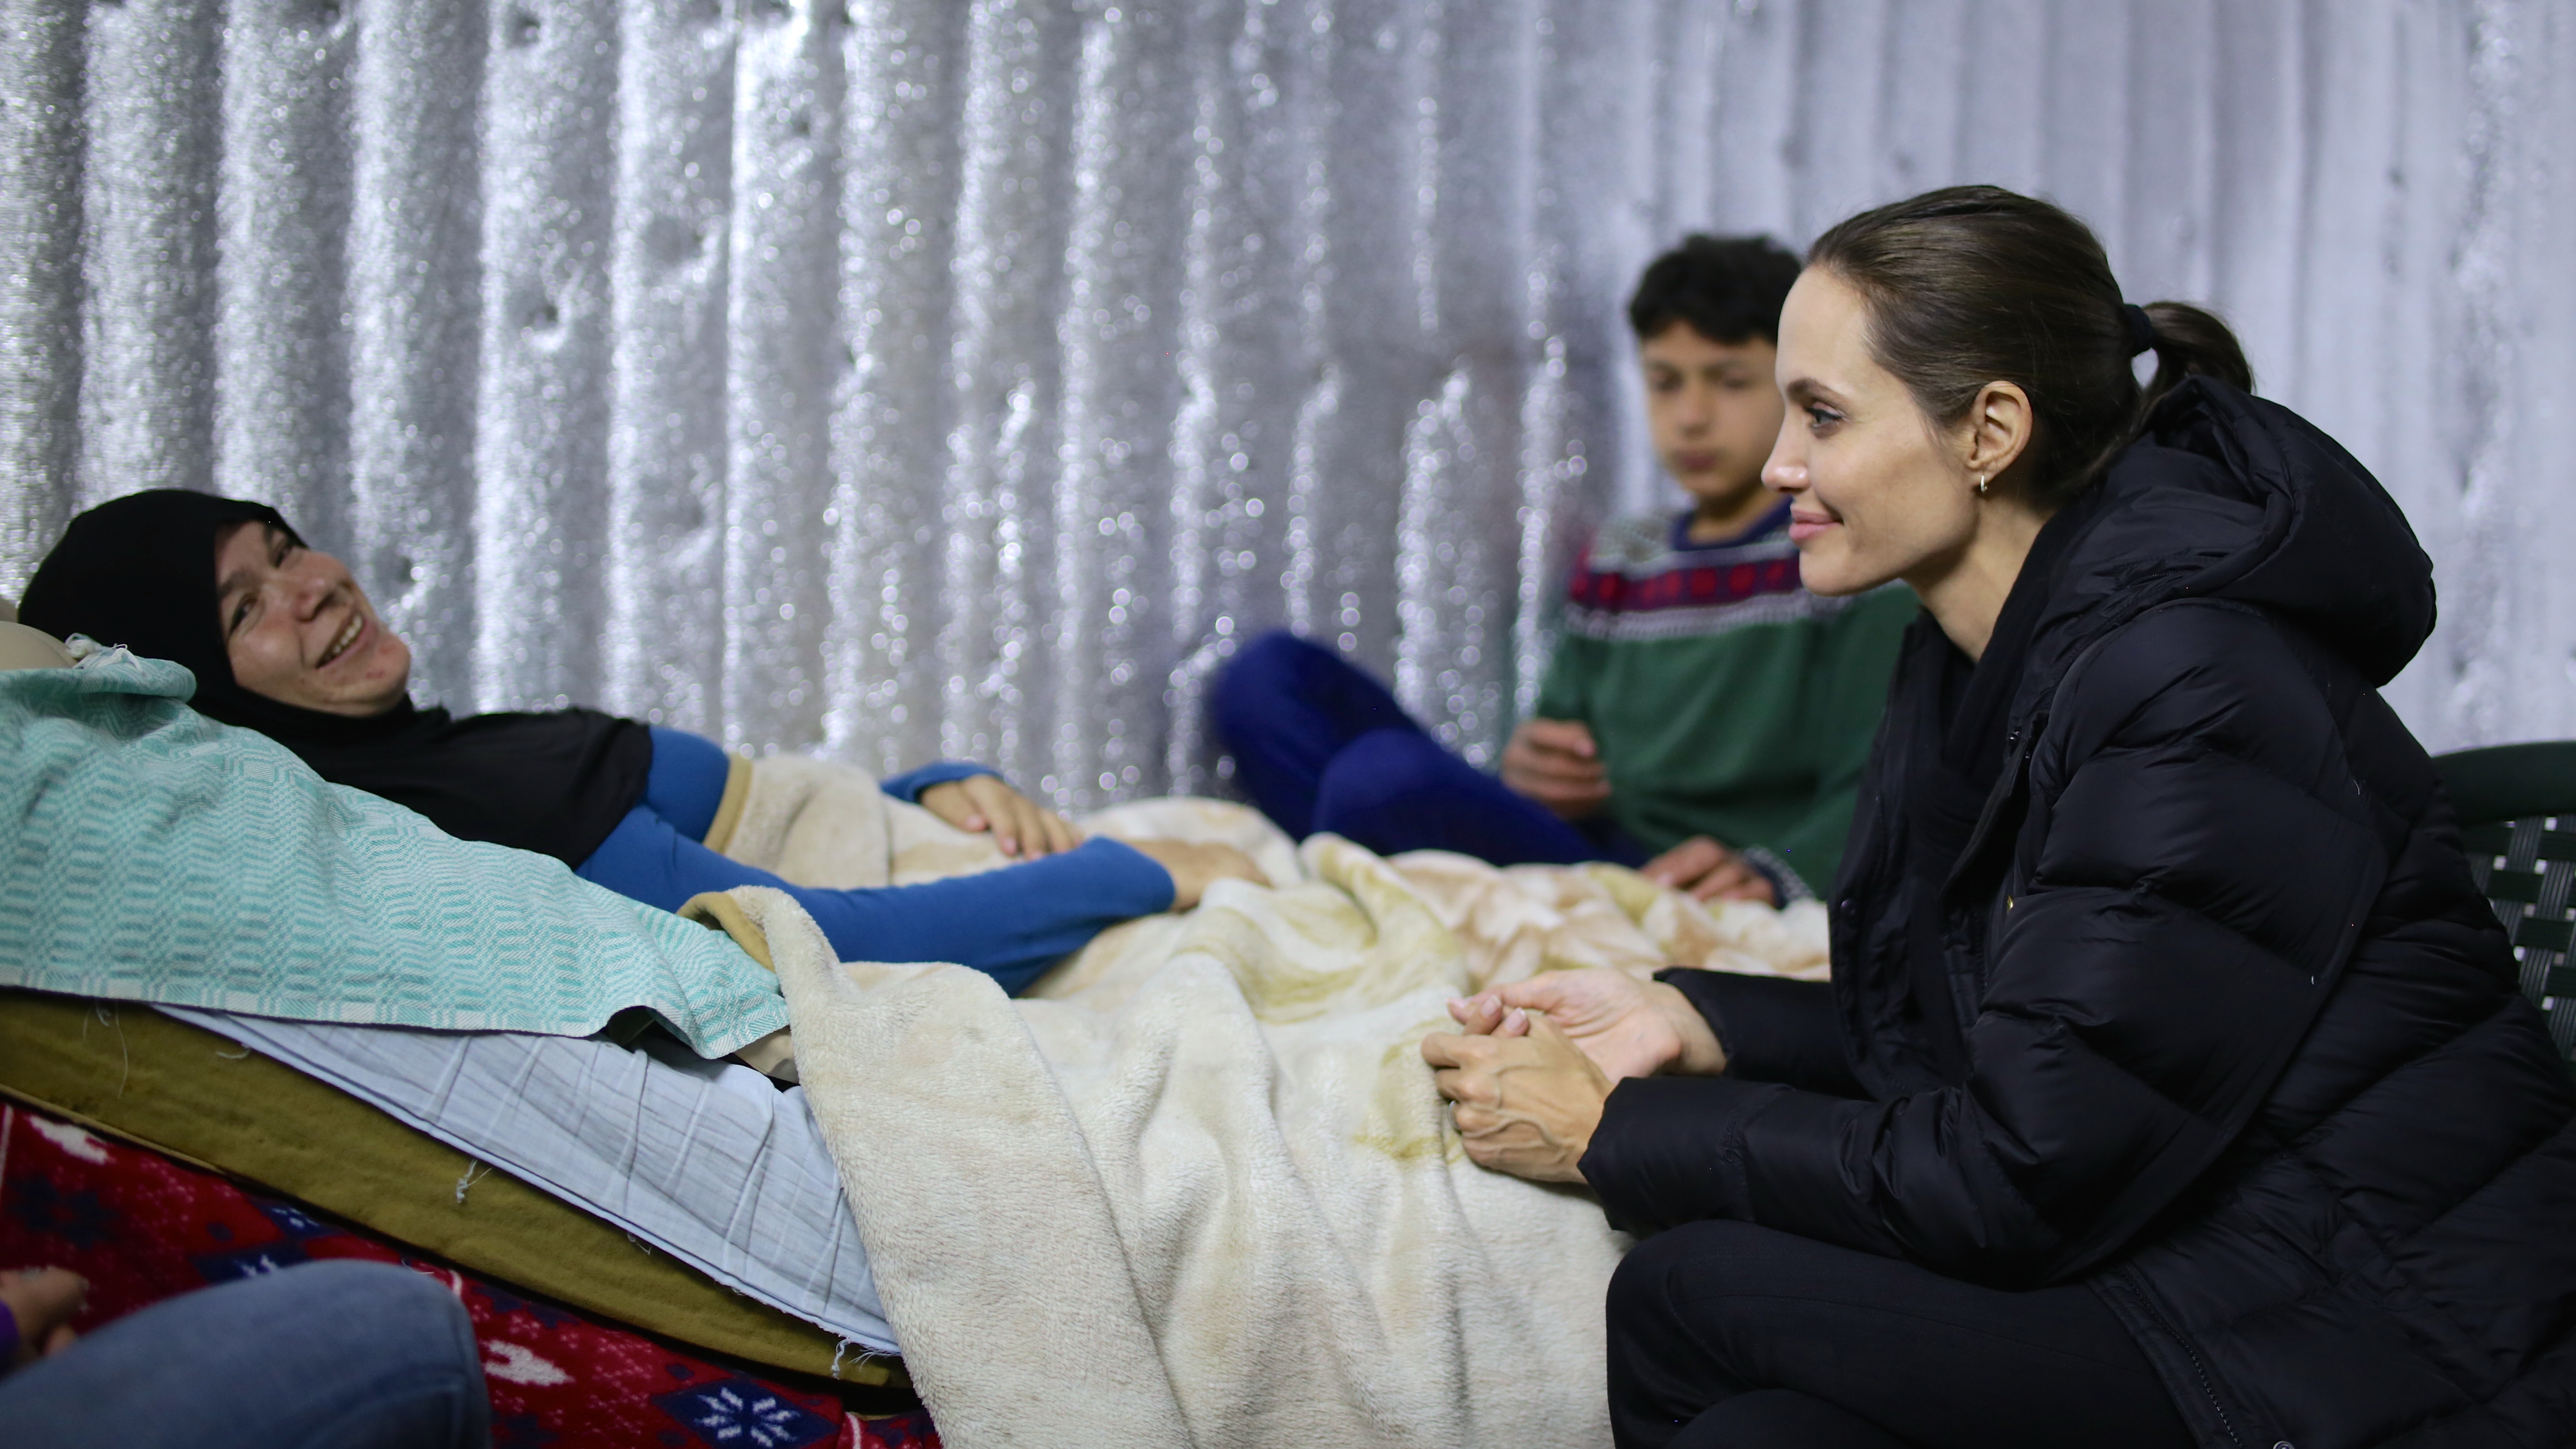  Angelina Jolie Pitt, UNHCR's Special Envoy, met with Syrian refugees in Lebanon.